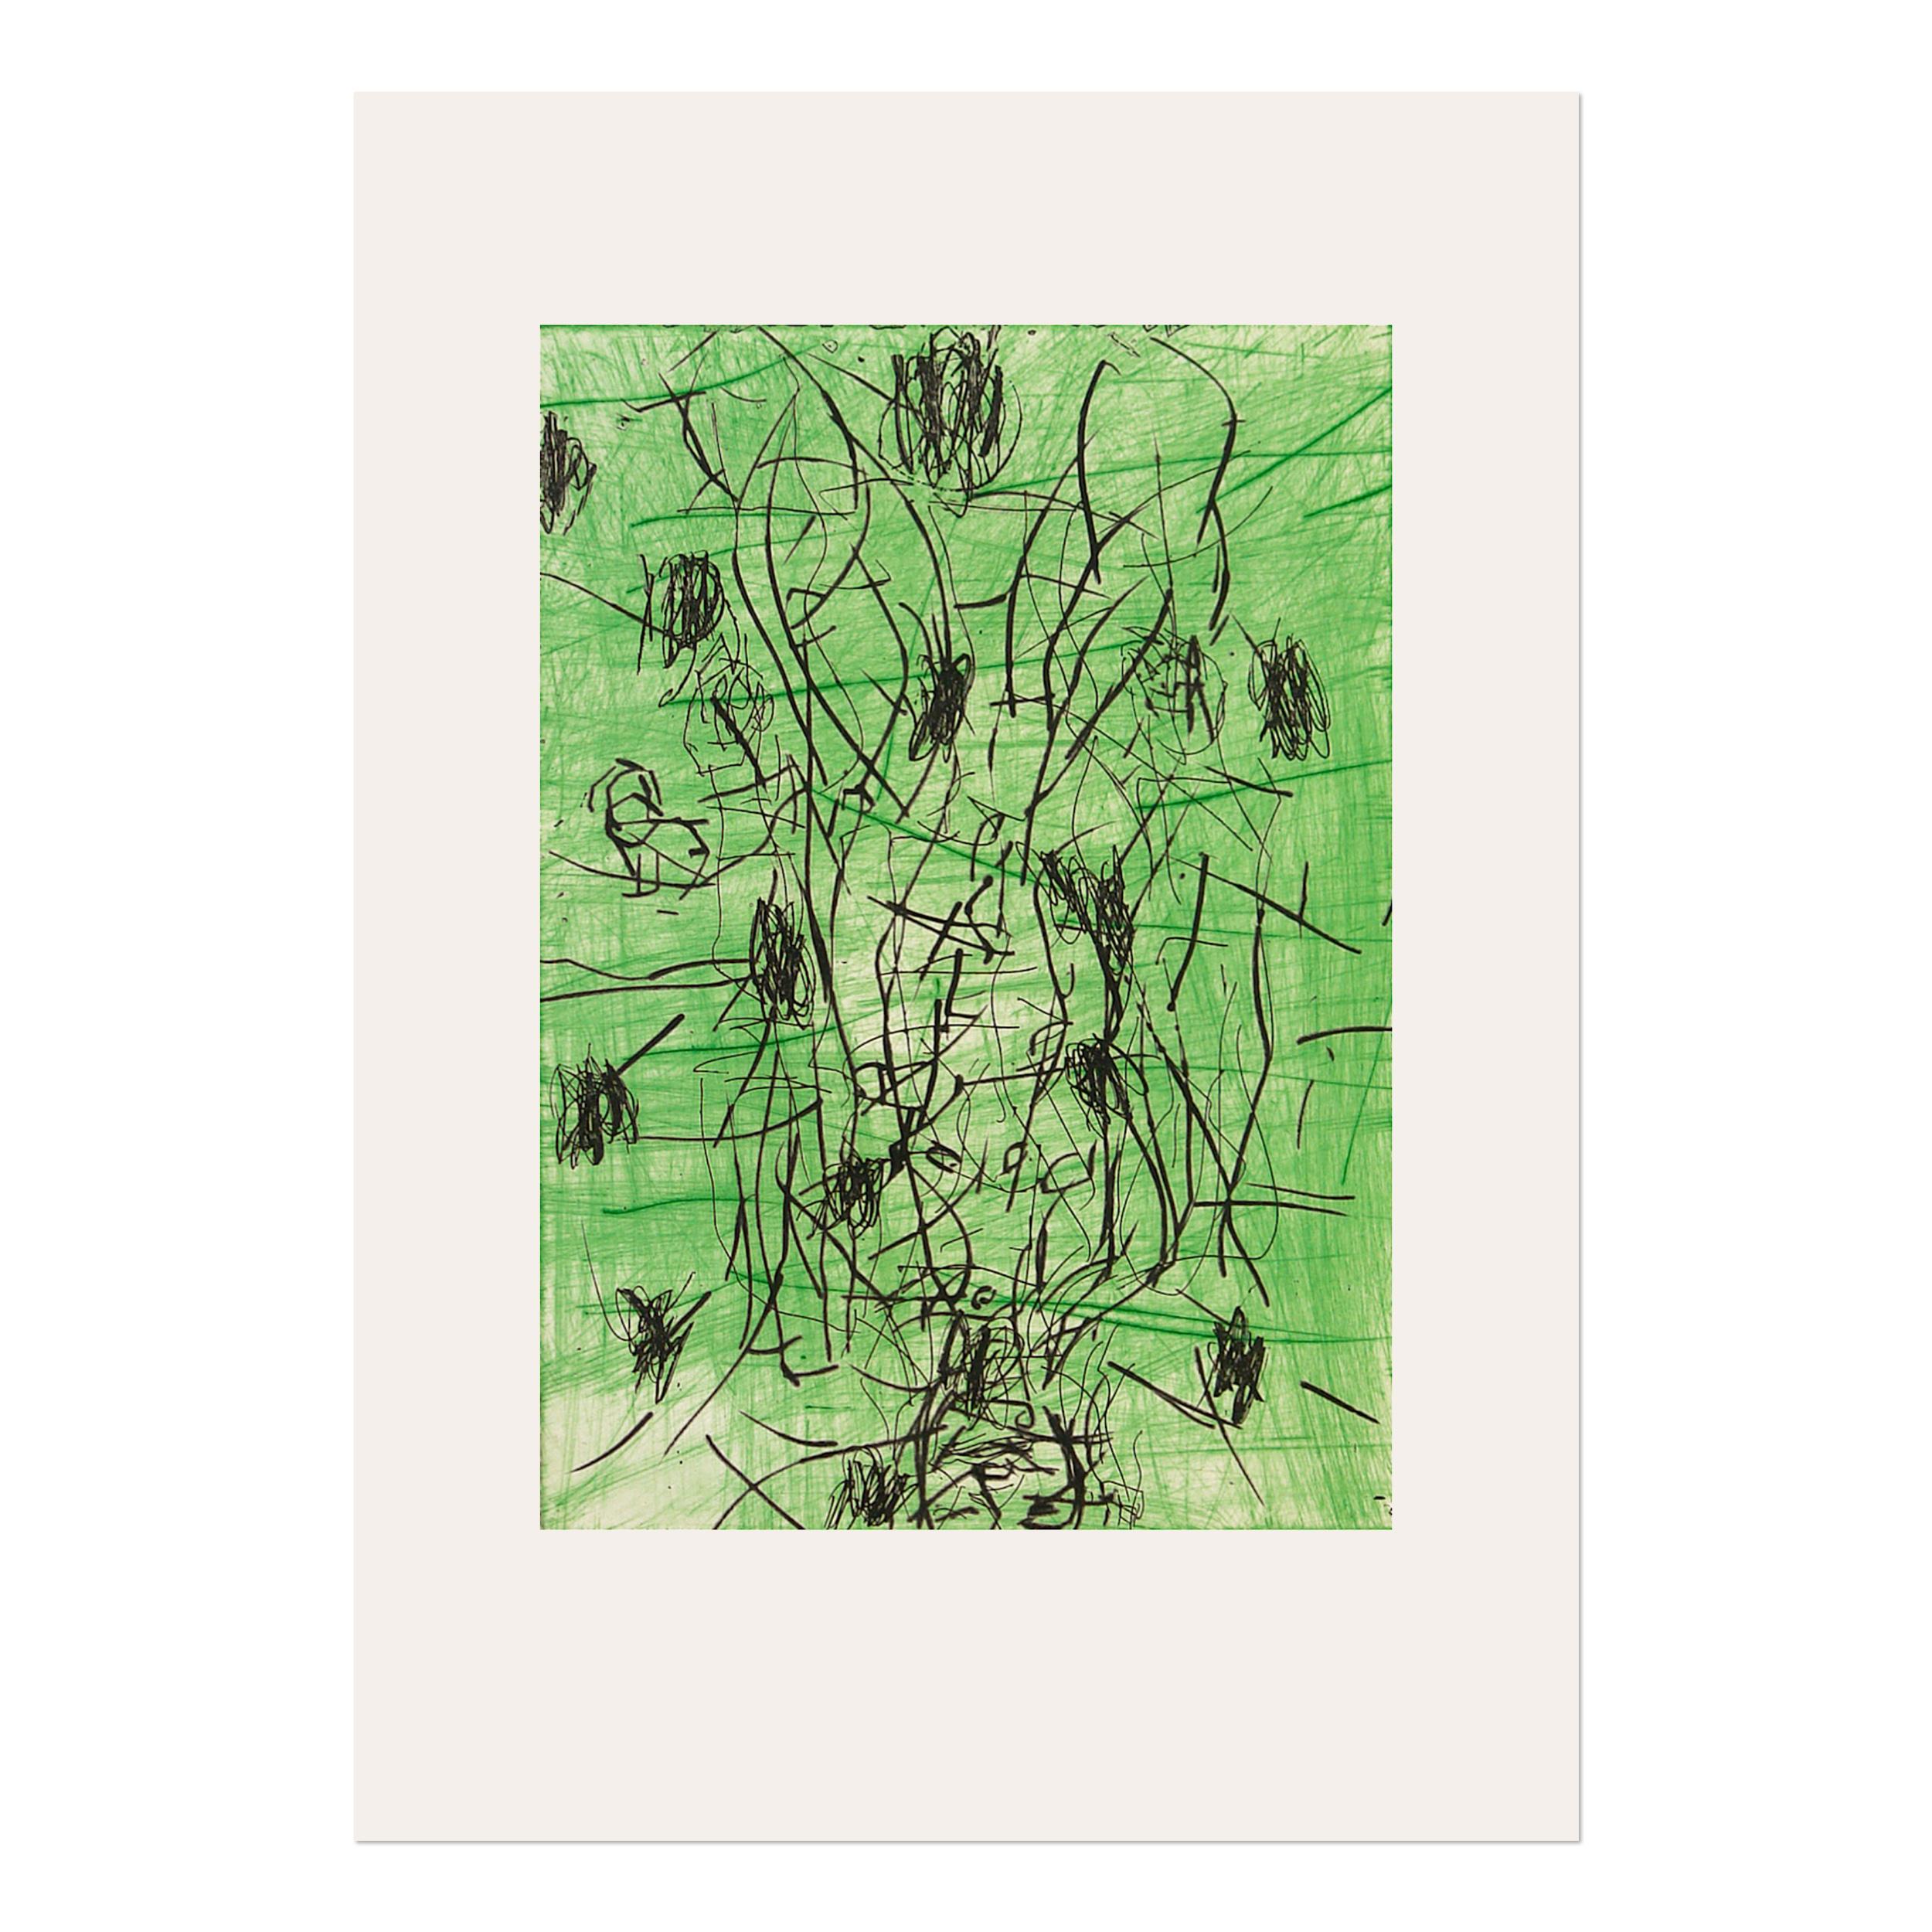 Georg Baselitz Abstract Print - Bart, Woodcut, 1990/91, Contemporary Art, Expressionism, 20th Century